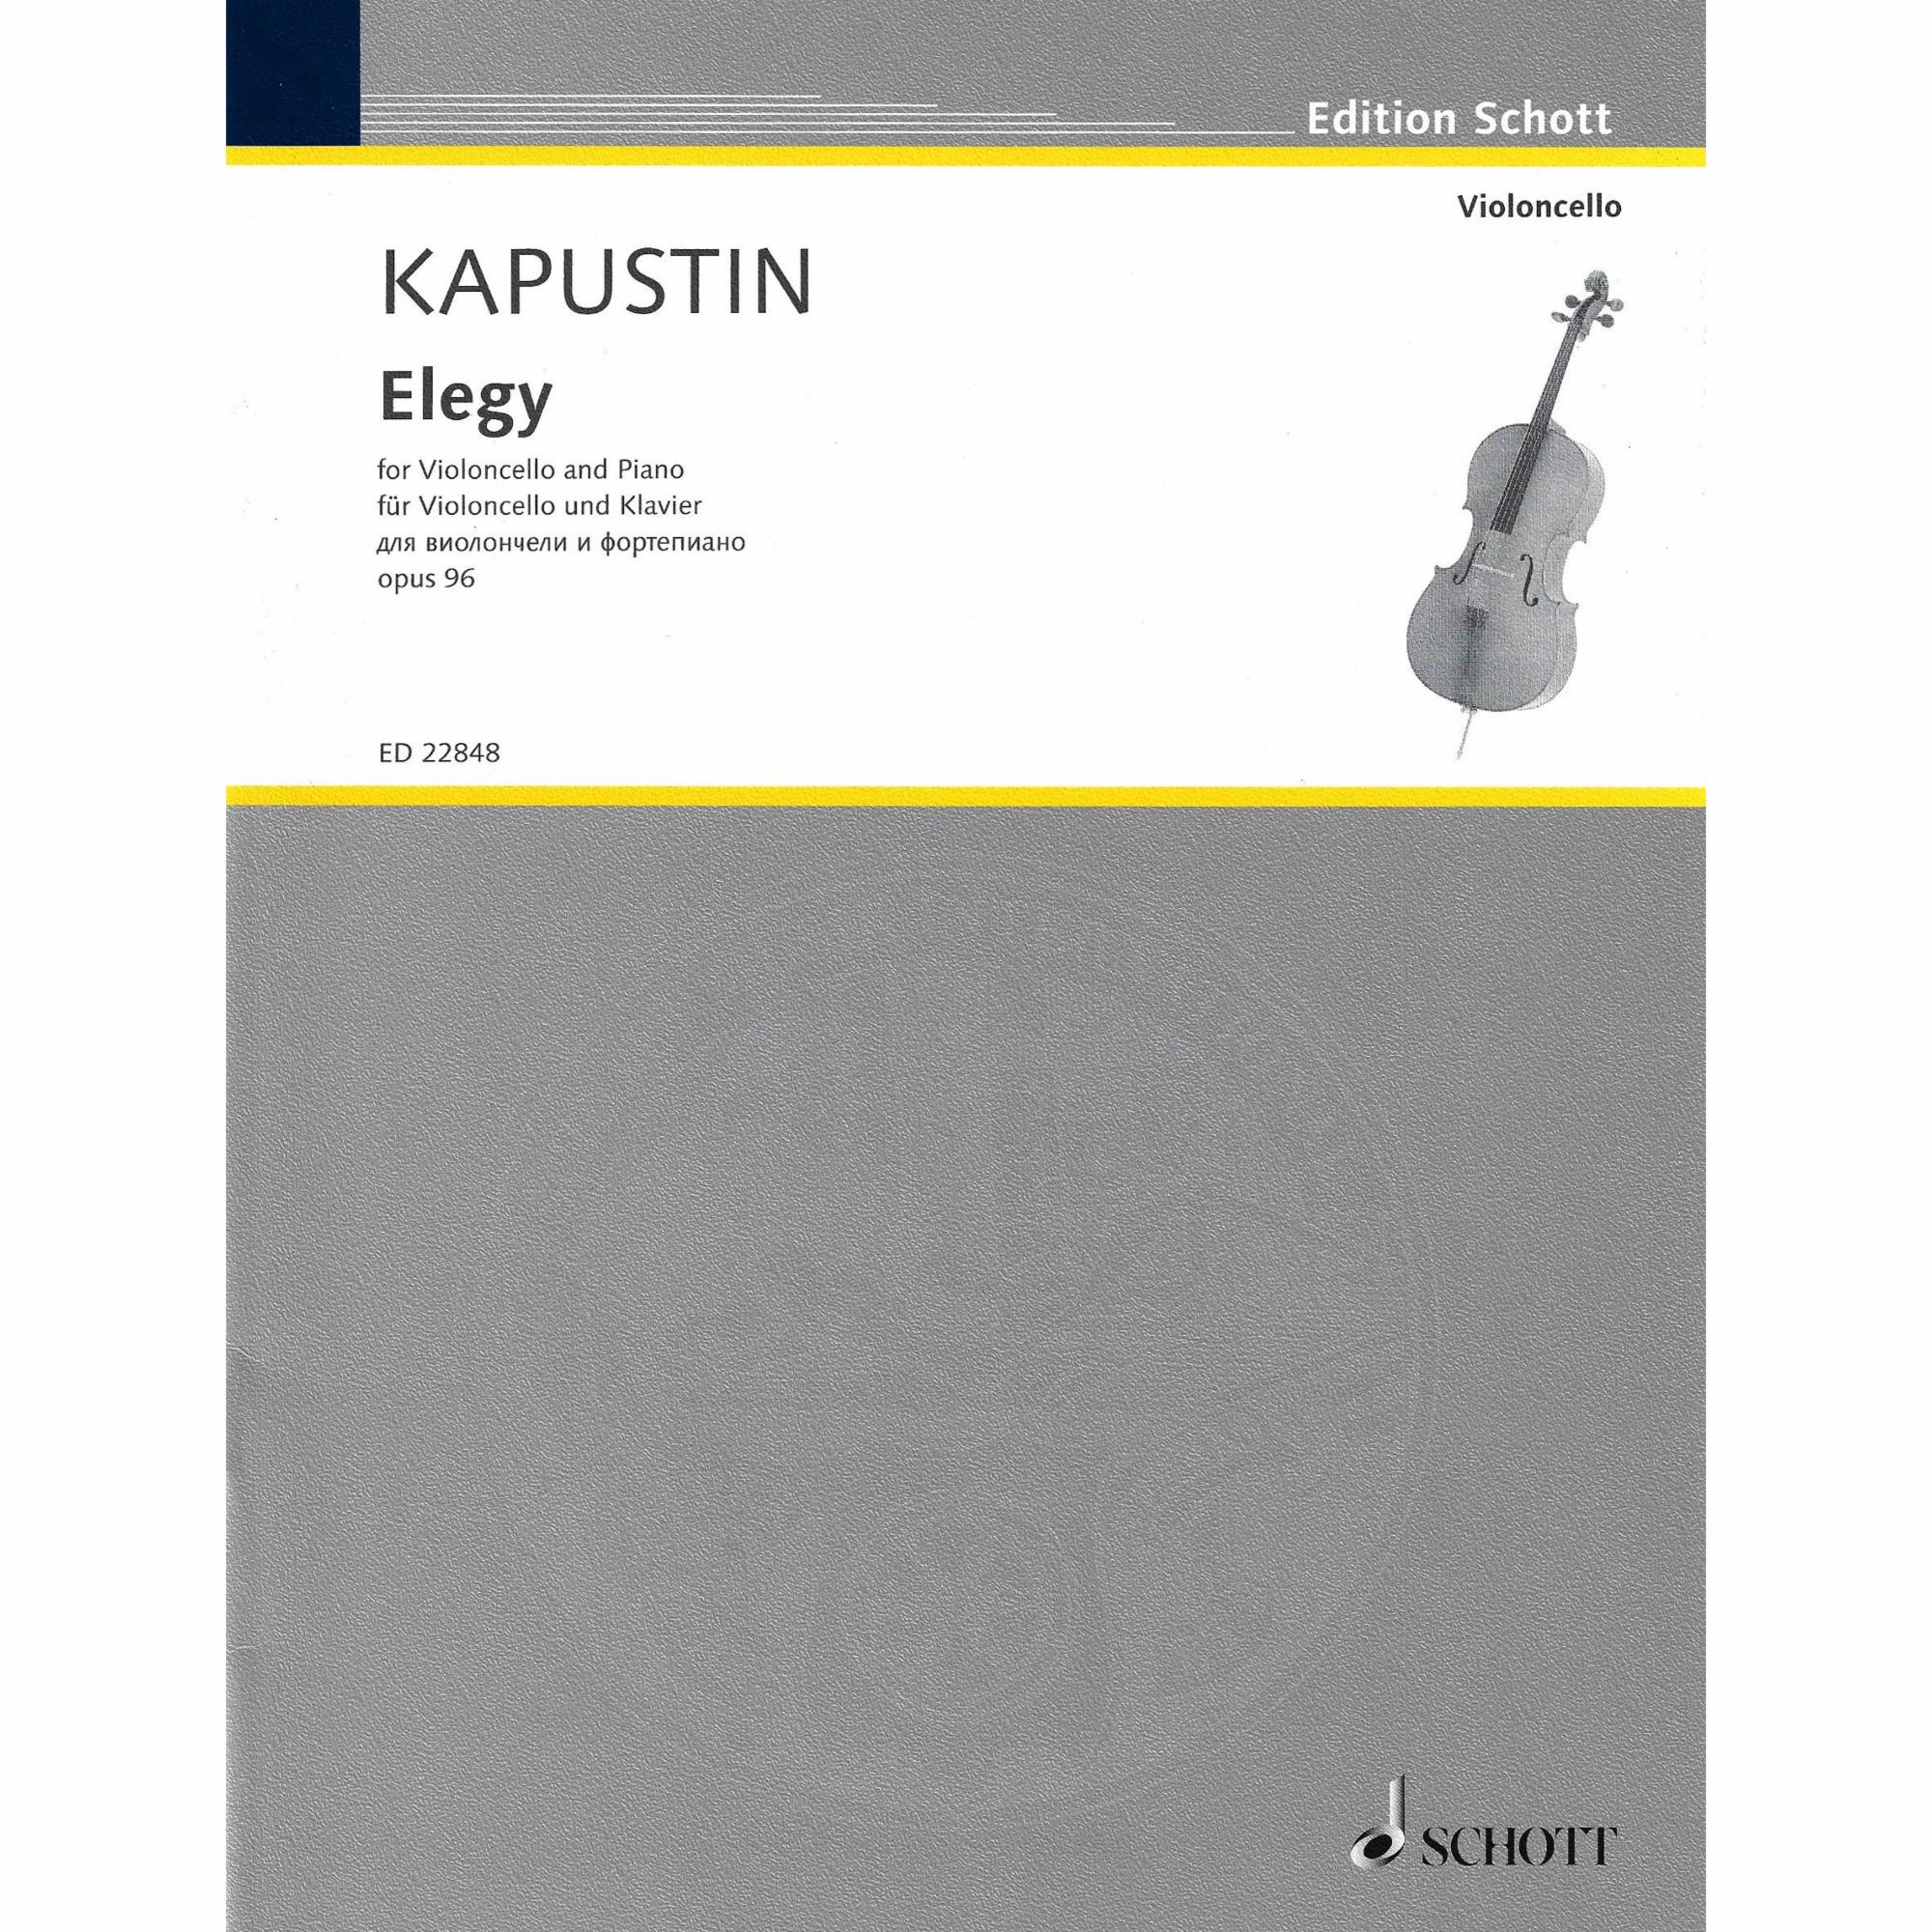 Elegy, Op. 96 for Cello and Piano